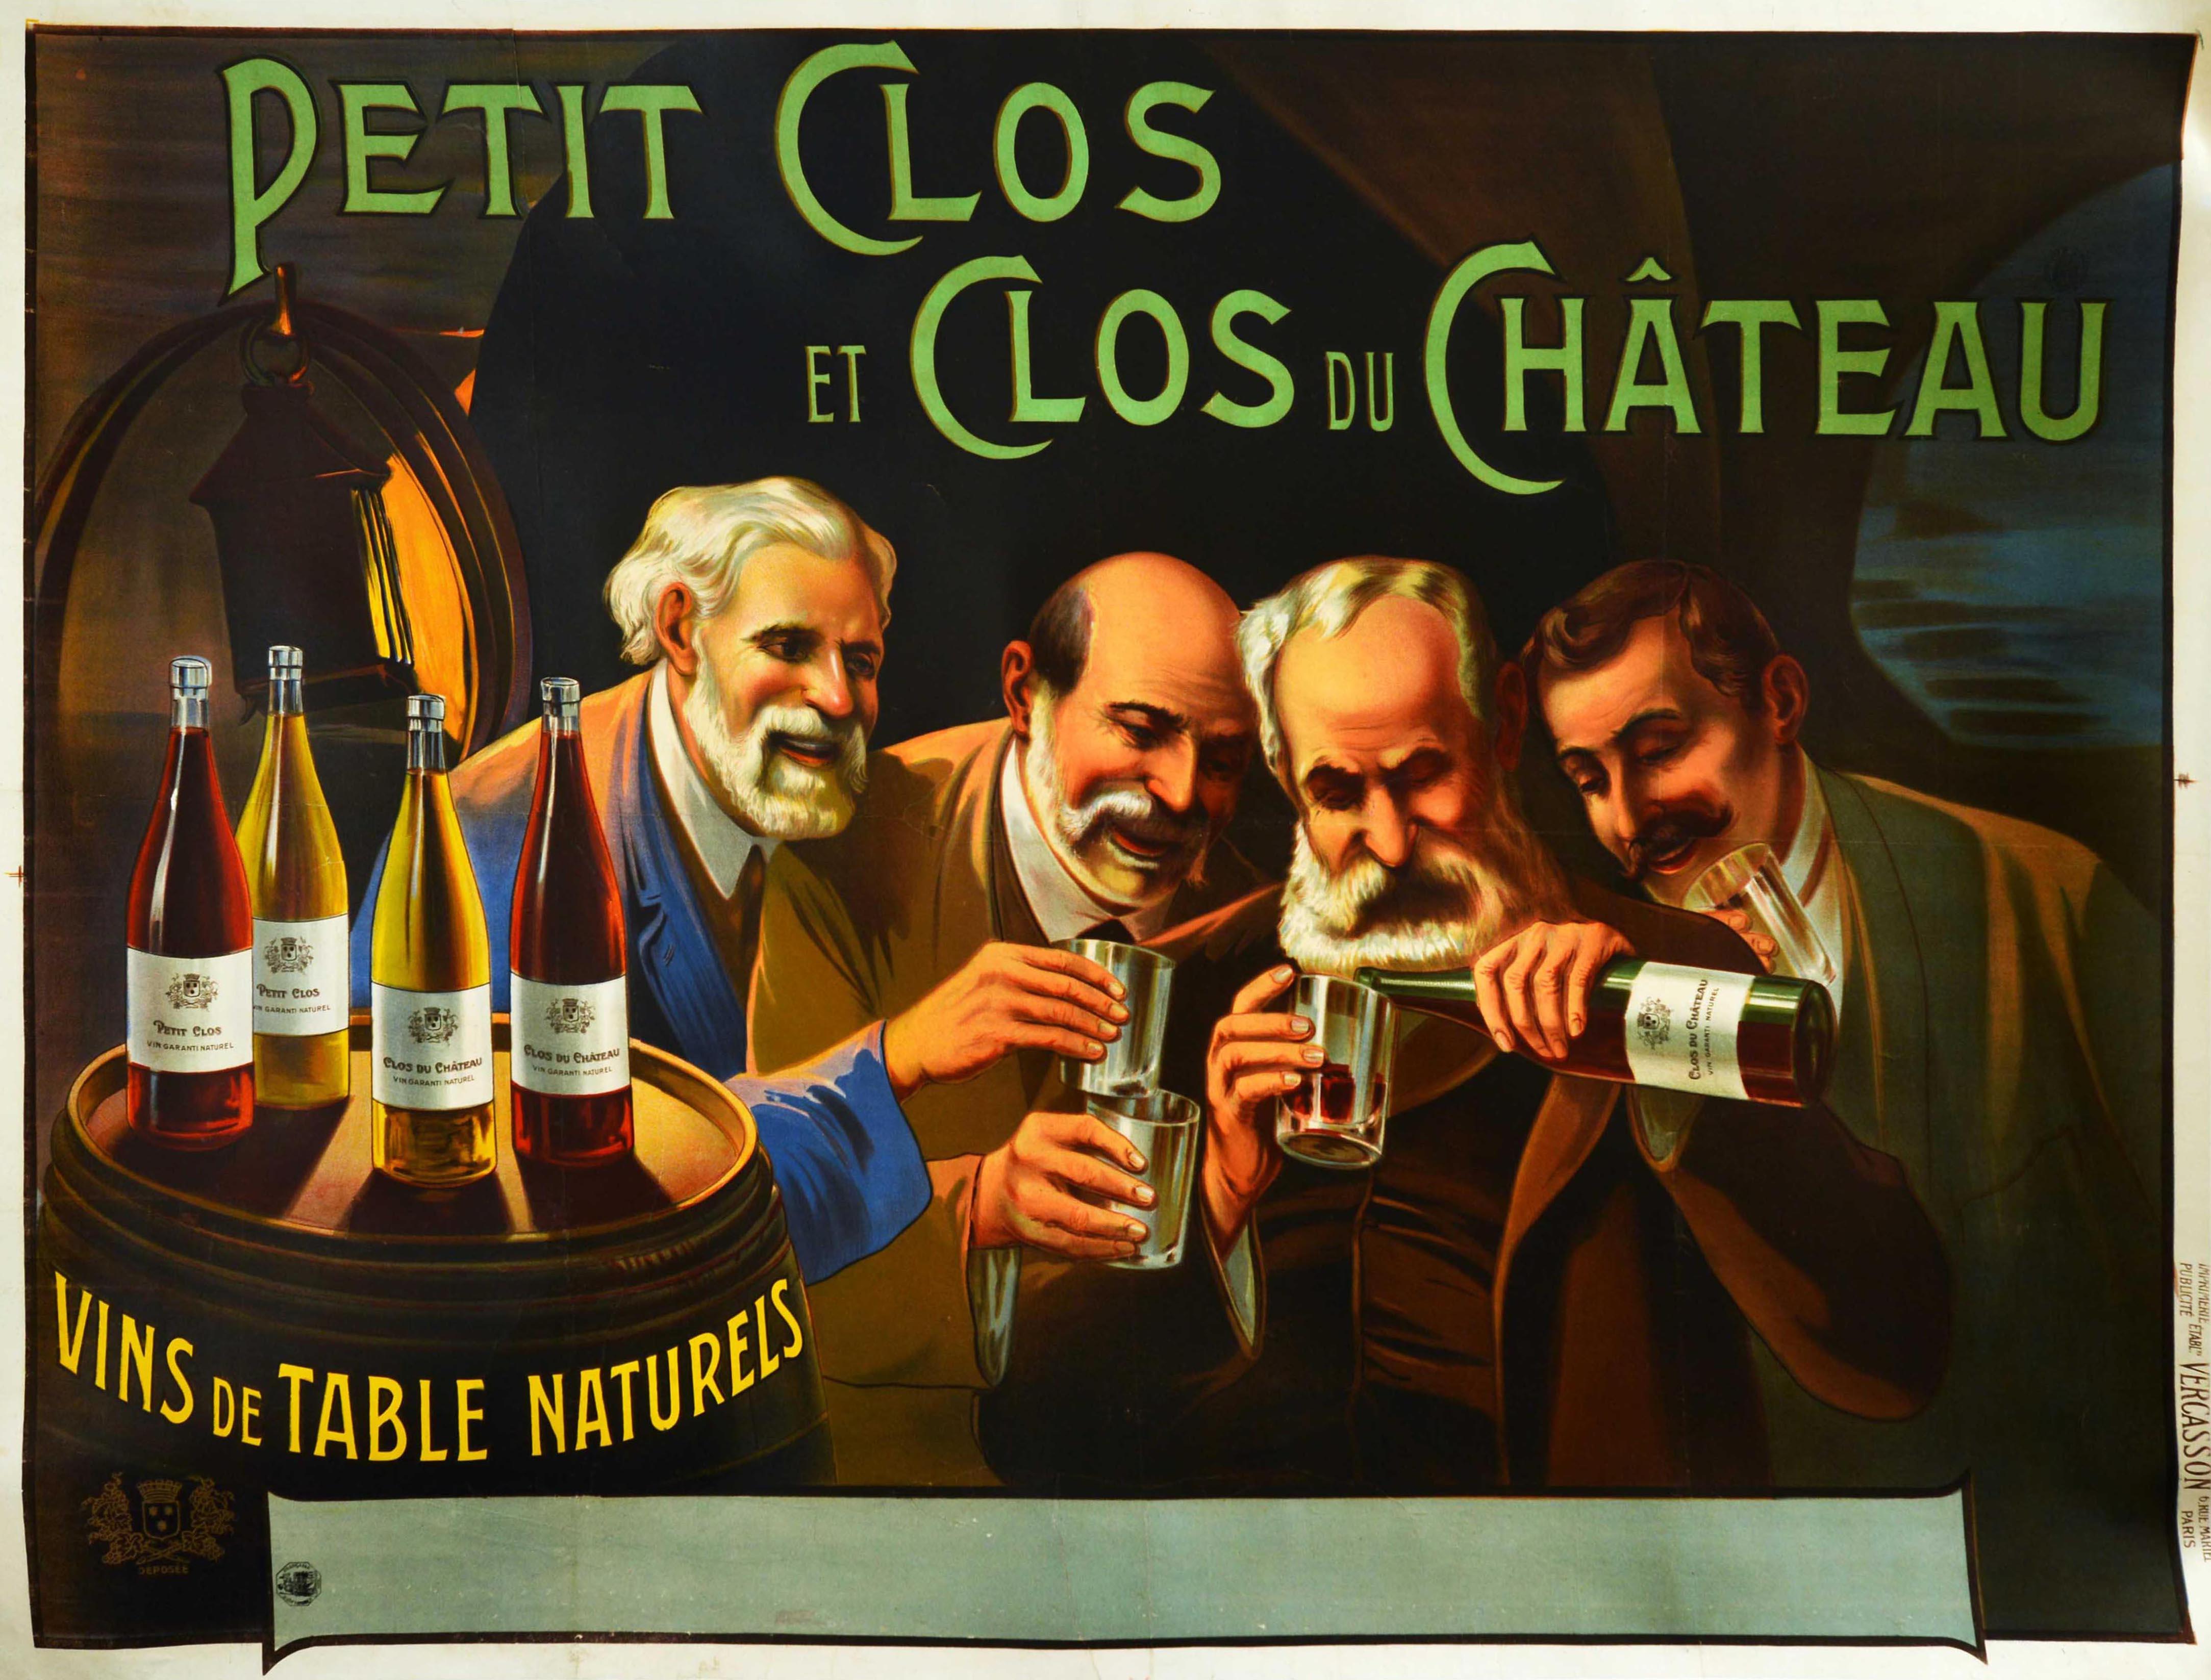 Original antique drink advertising poster for Petit Clos et Clos du Chateau wines featuring a bright and colourful illustration of four men with moustaches and beards in a wine cellar lit by a lantern, smiling while holding glasses and pouring Petit